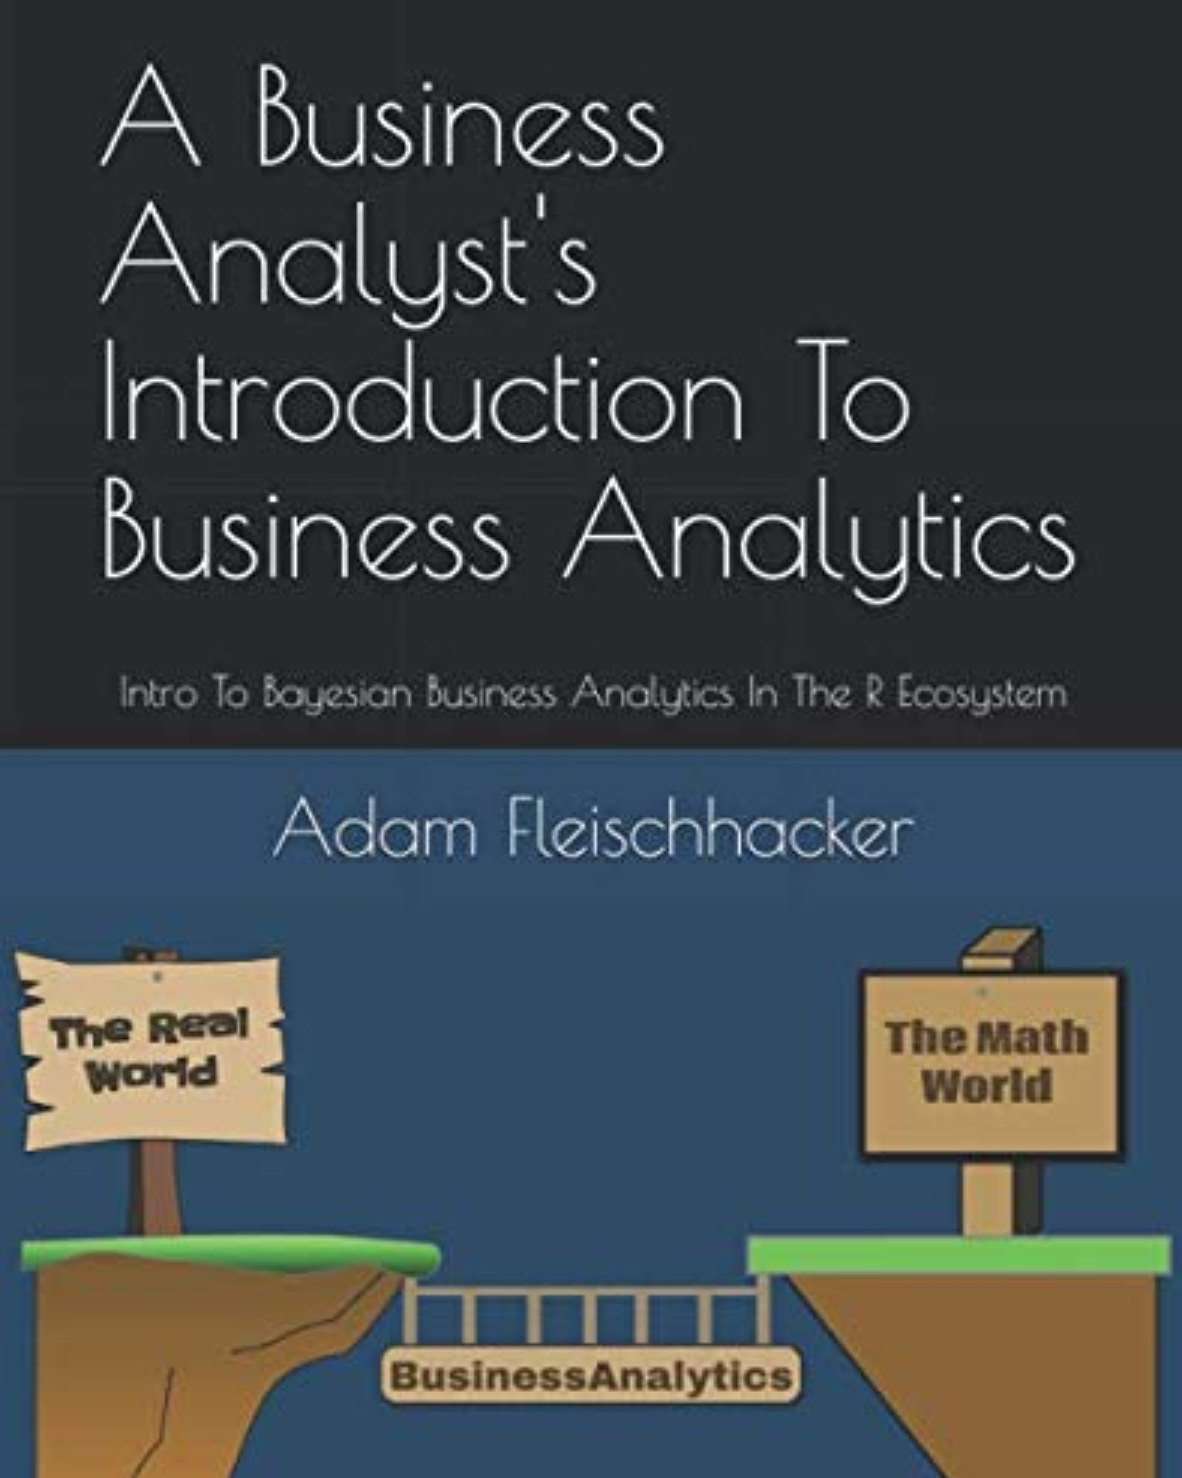 Buy a beautifully printed in-color version of “A Business Analyst’s Guide to Business Analytics” on Amazon: http://www.amazon.com/dp/B08DBYPRD2.